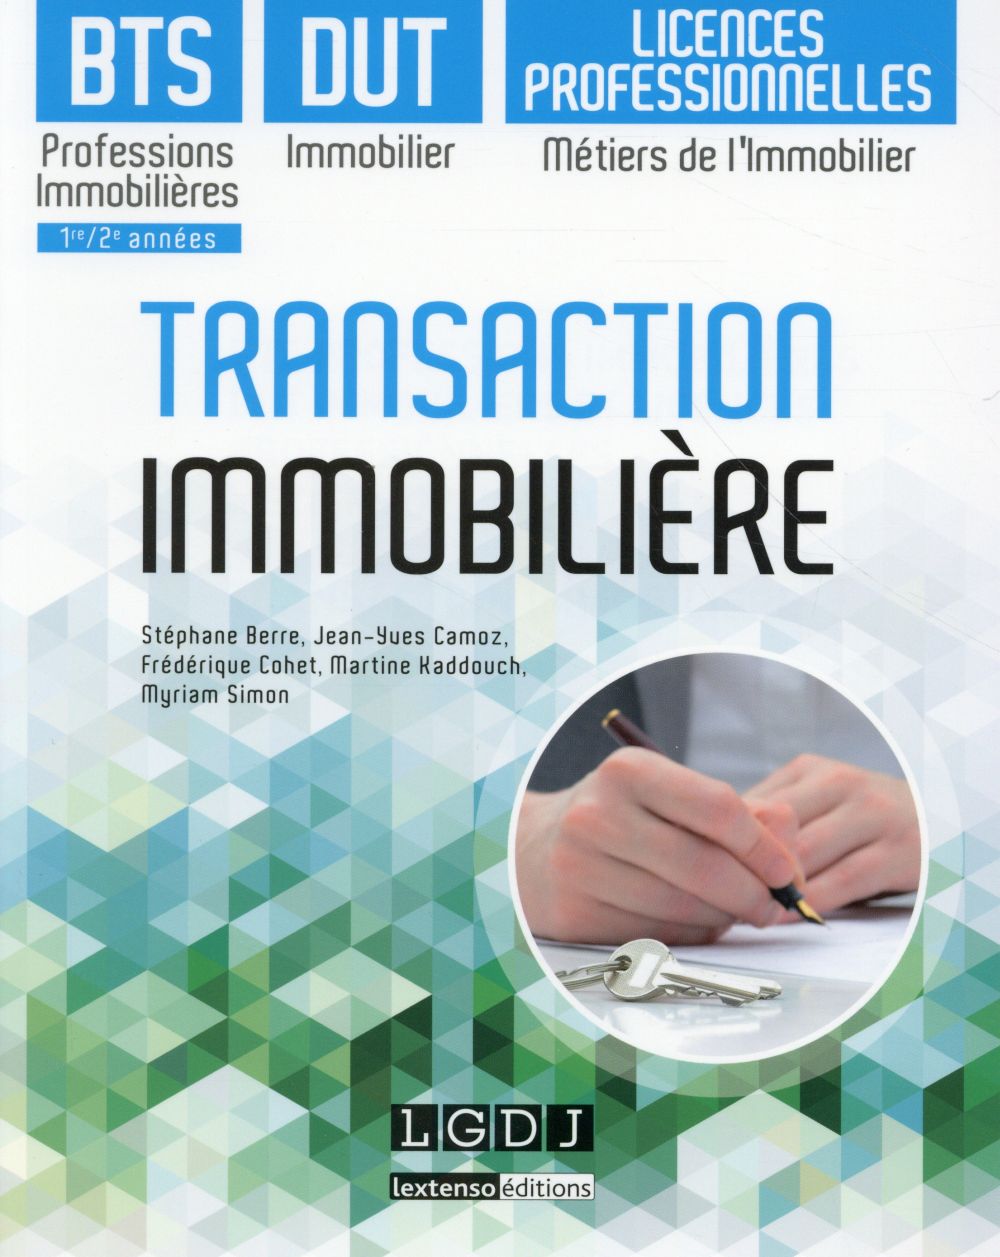 TRANSACTION IMMOBILIERE - BTS PROFESSIONS IMMOBILIERES -DUT IMMOBILIER -LICENCES PROFESSIONNELLES ME